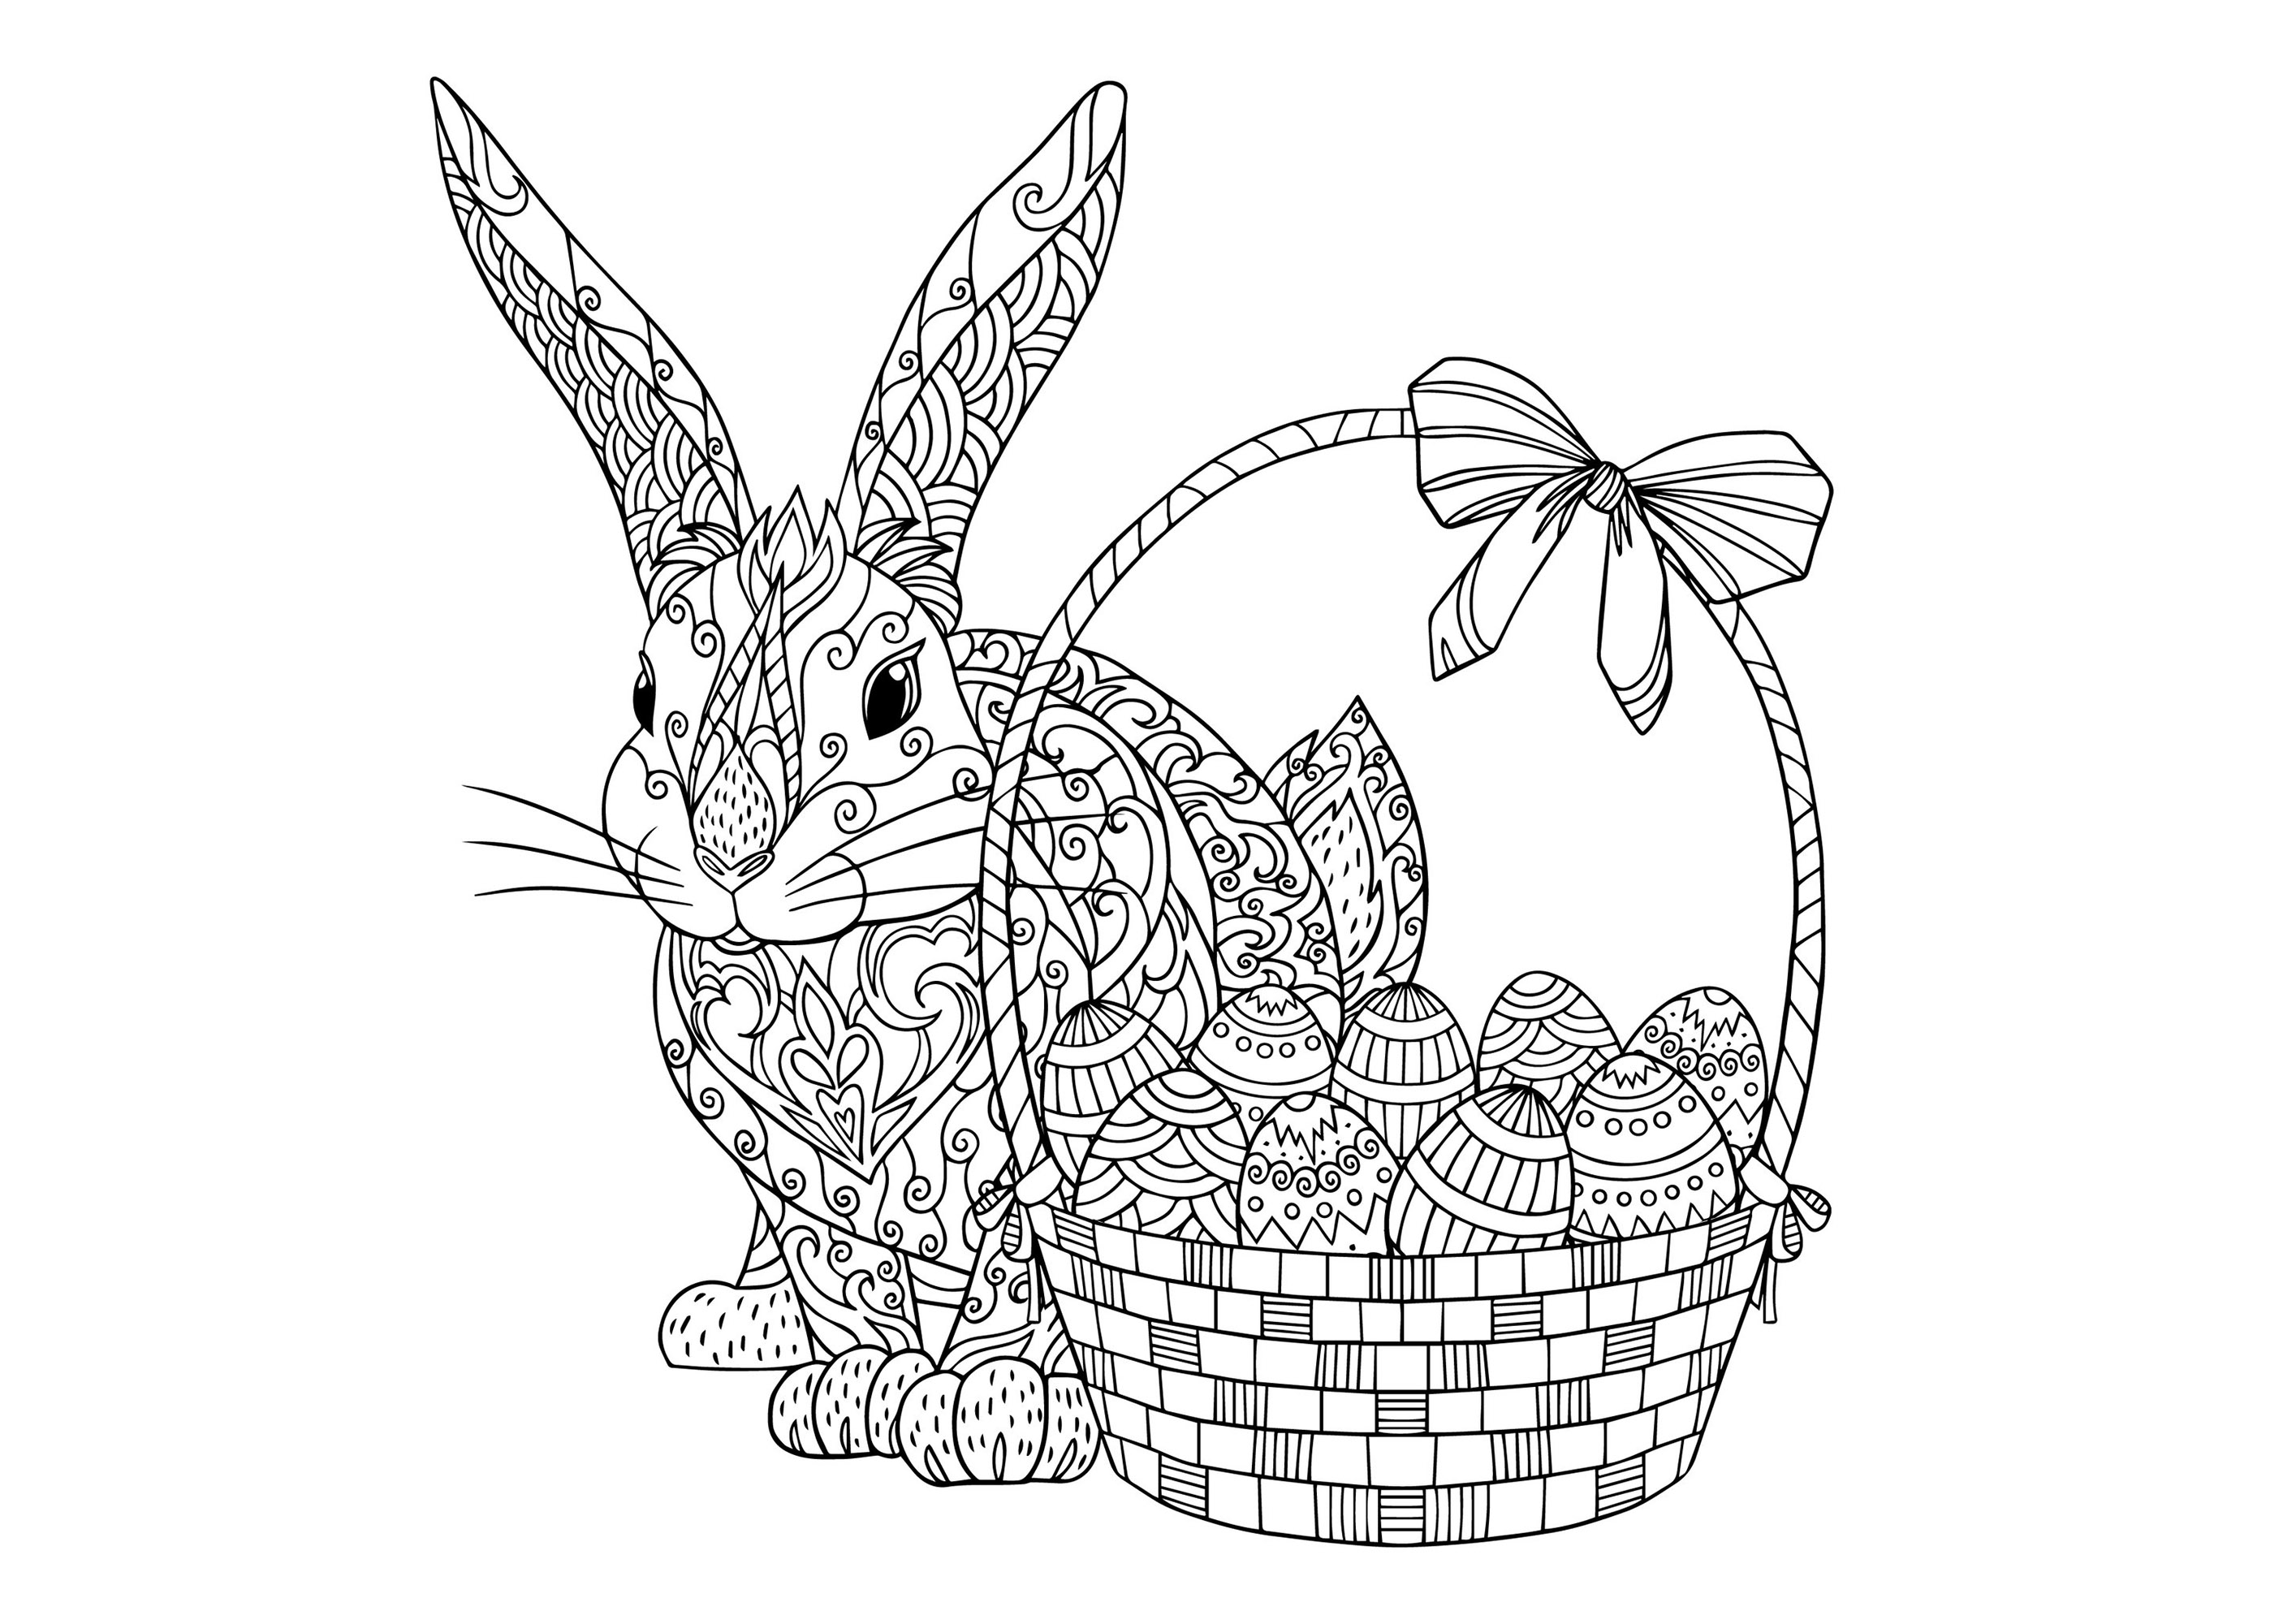 Easter bunny with basket with pretty eggs with simple and diverse patterns, Artist : Daniellabelaya   Source : 123rf